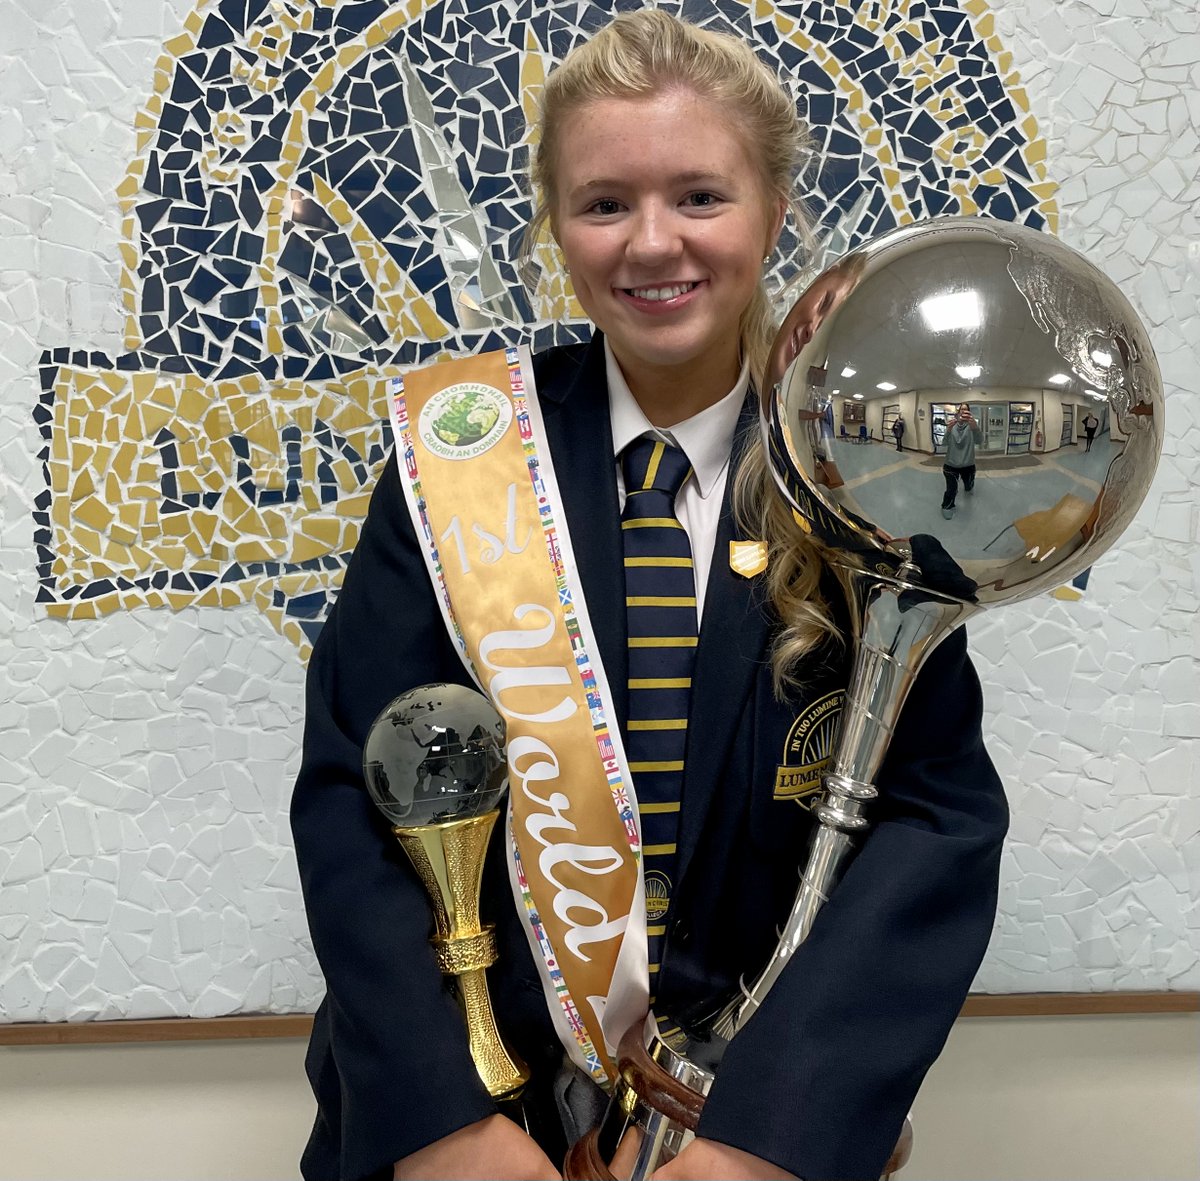 Pictured with her World Globe, is Ava Mc Devitt, a pupil of the Porter School of Irish Dancing who came 1st in World Irish Dancing Championships in Killarney recently. This is the 4th consecutive world title for Ava.